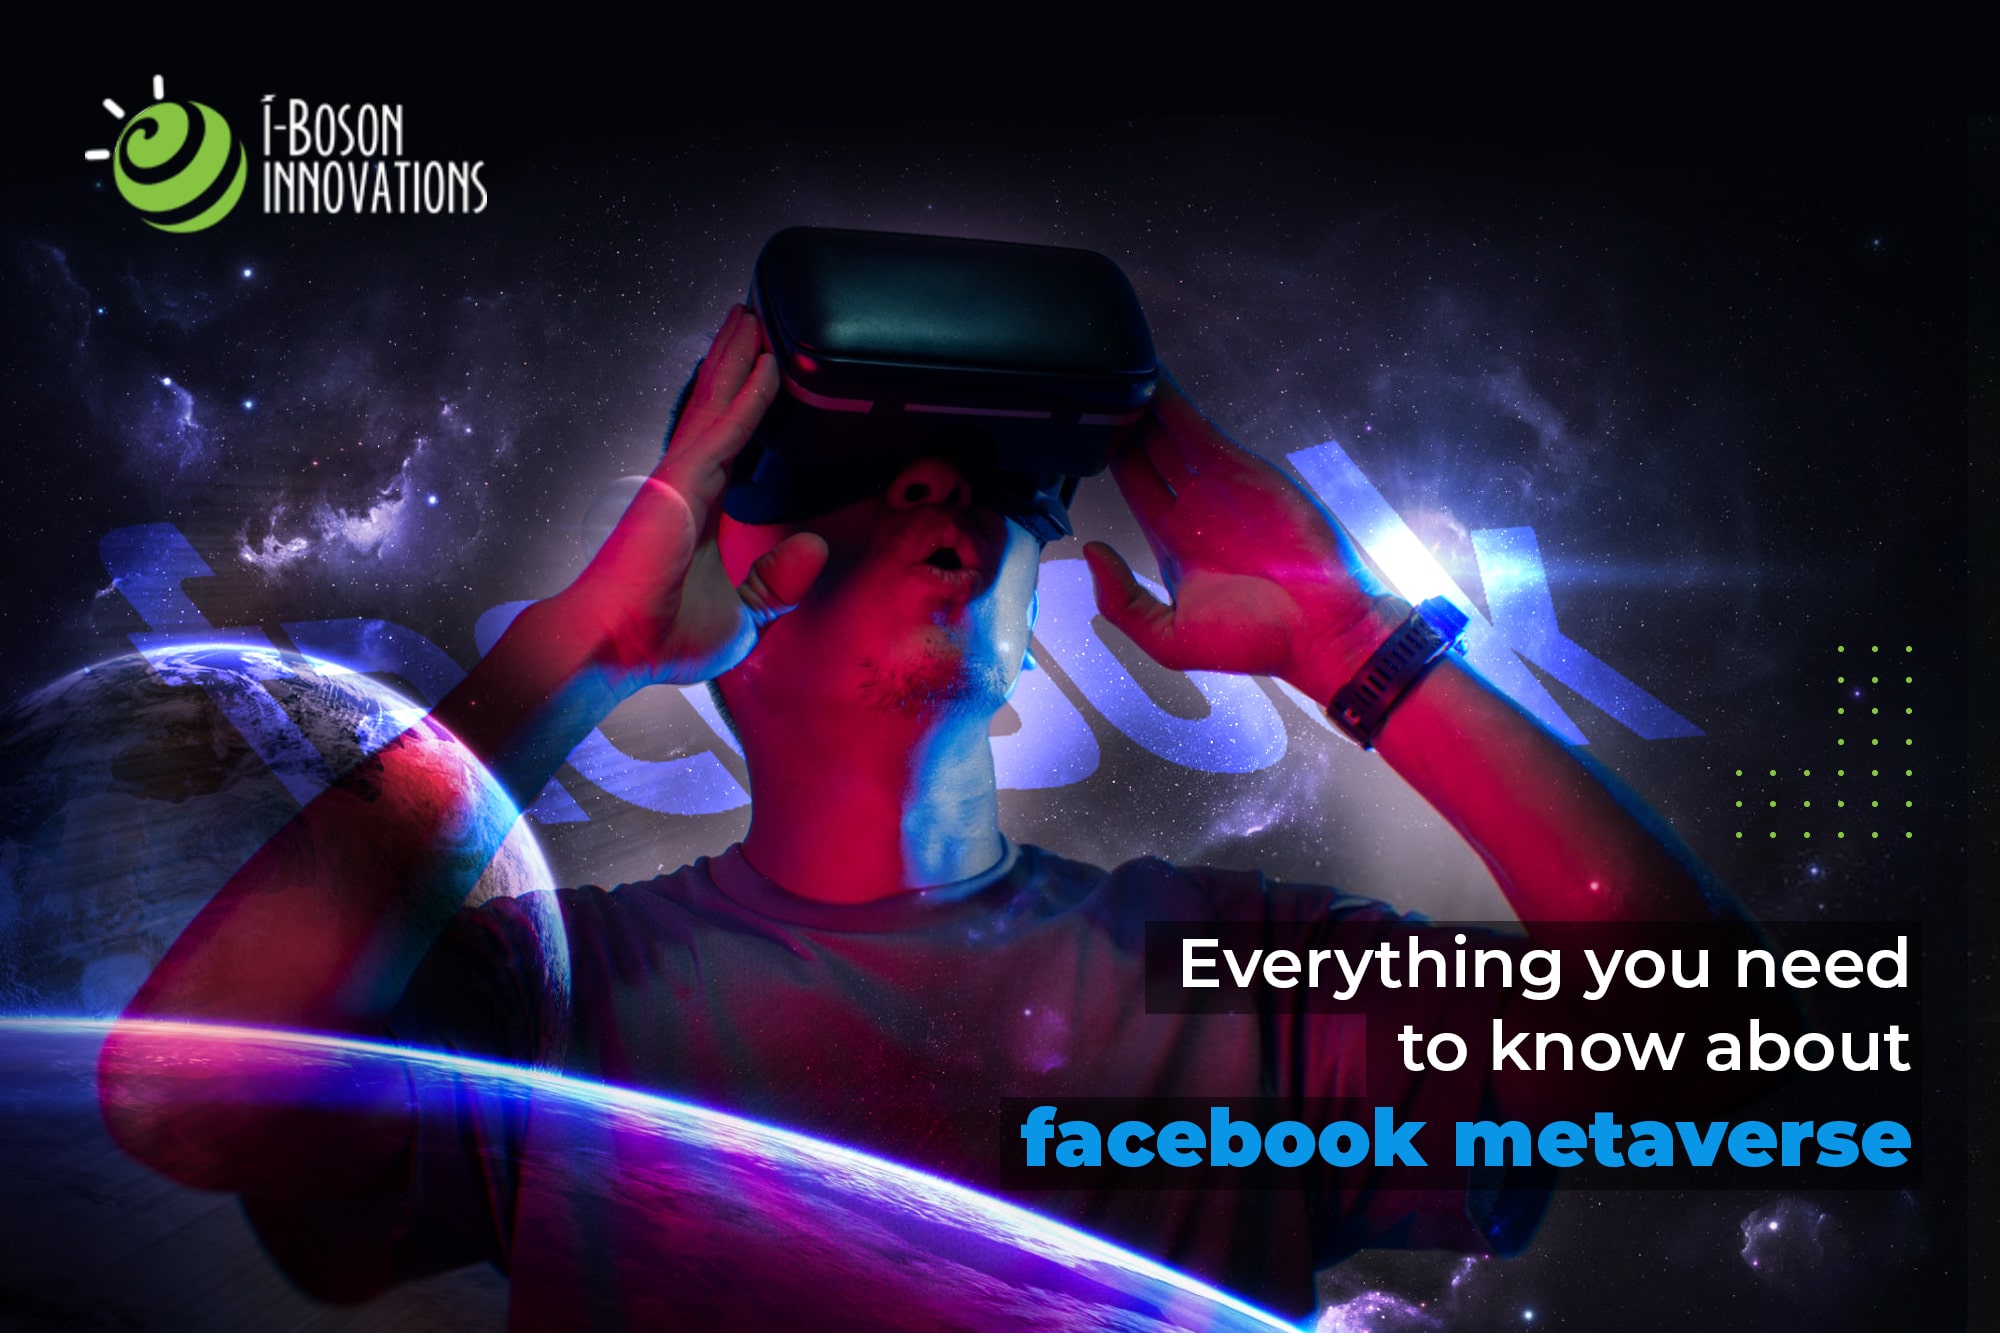 facebook-and-metaverse-what-you-need-to-know